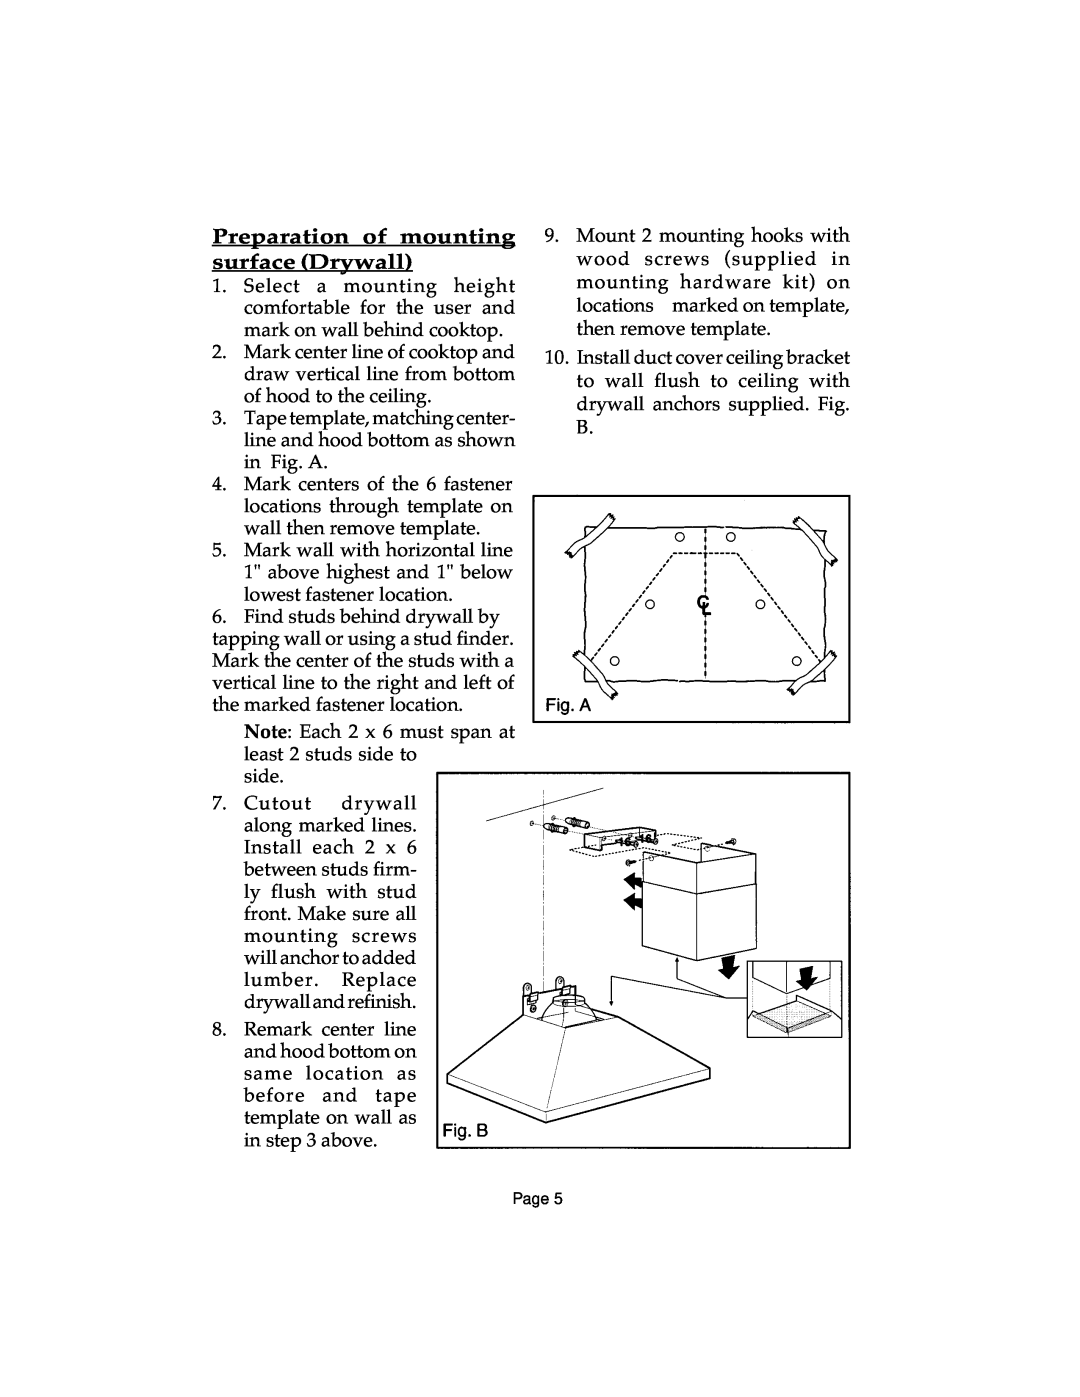 Thermador HTSW, HCSW, HDW, HGSW, HSW installation instructions Preparation of mounting surface Drywall 